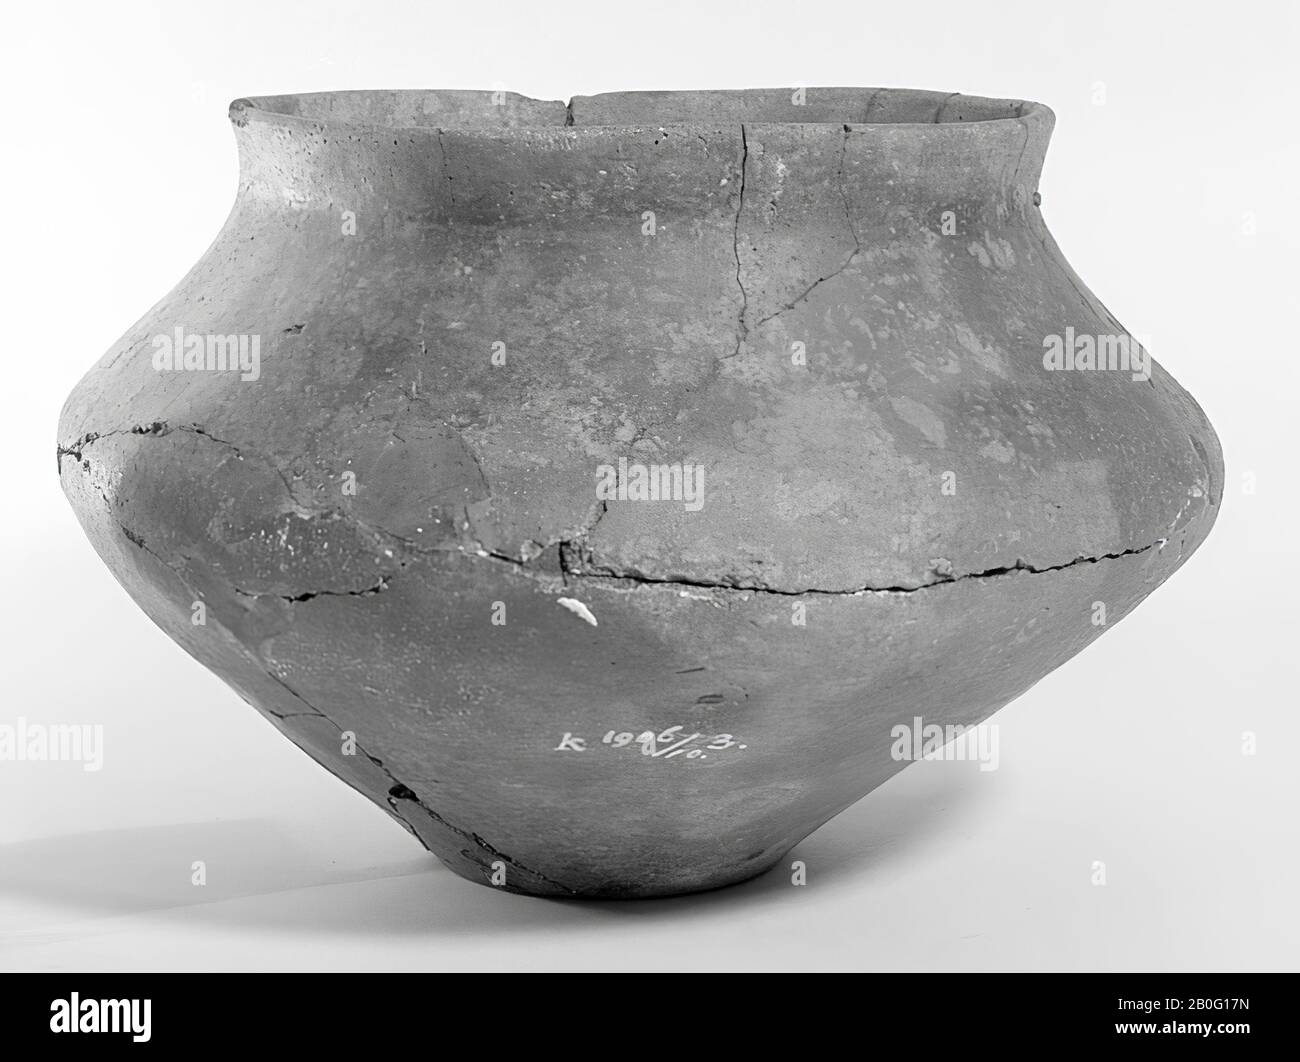 Urn of brown smooth baked earth, the belly striker. With old bondings and additions., Urn, earthenware, h: 16 cm, diam: 23.7 cm, prehistory -1200 Stock Photo